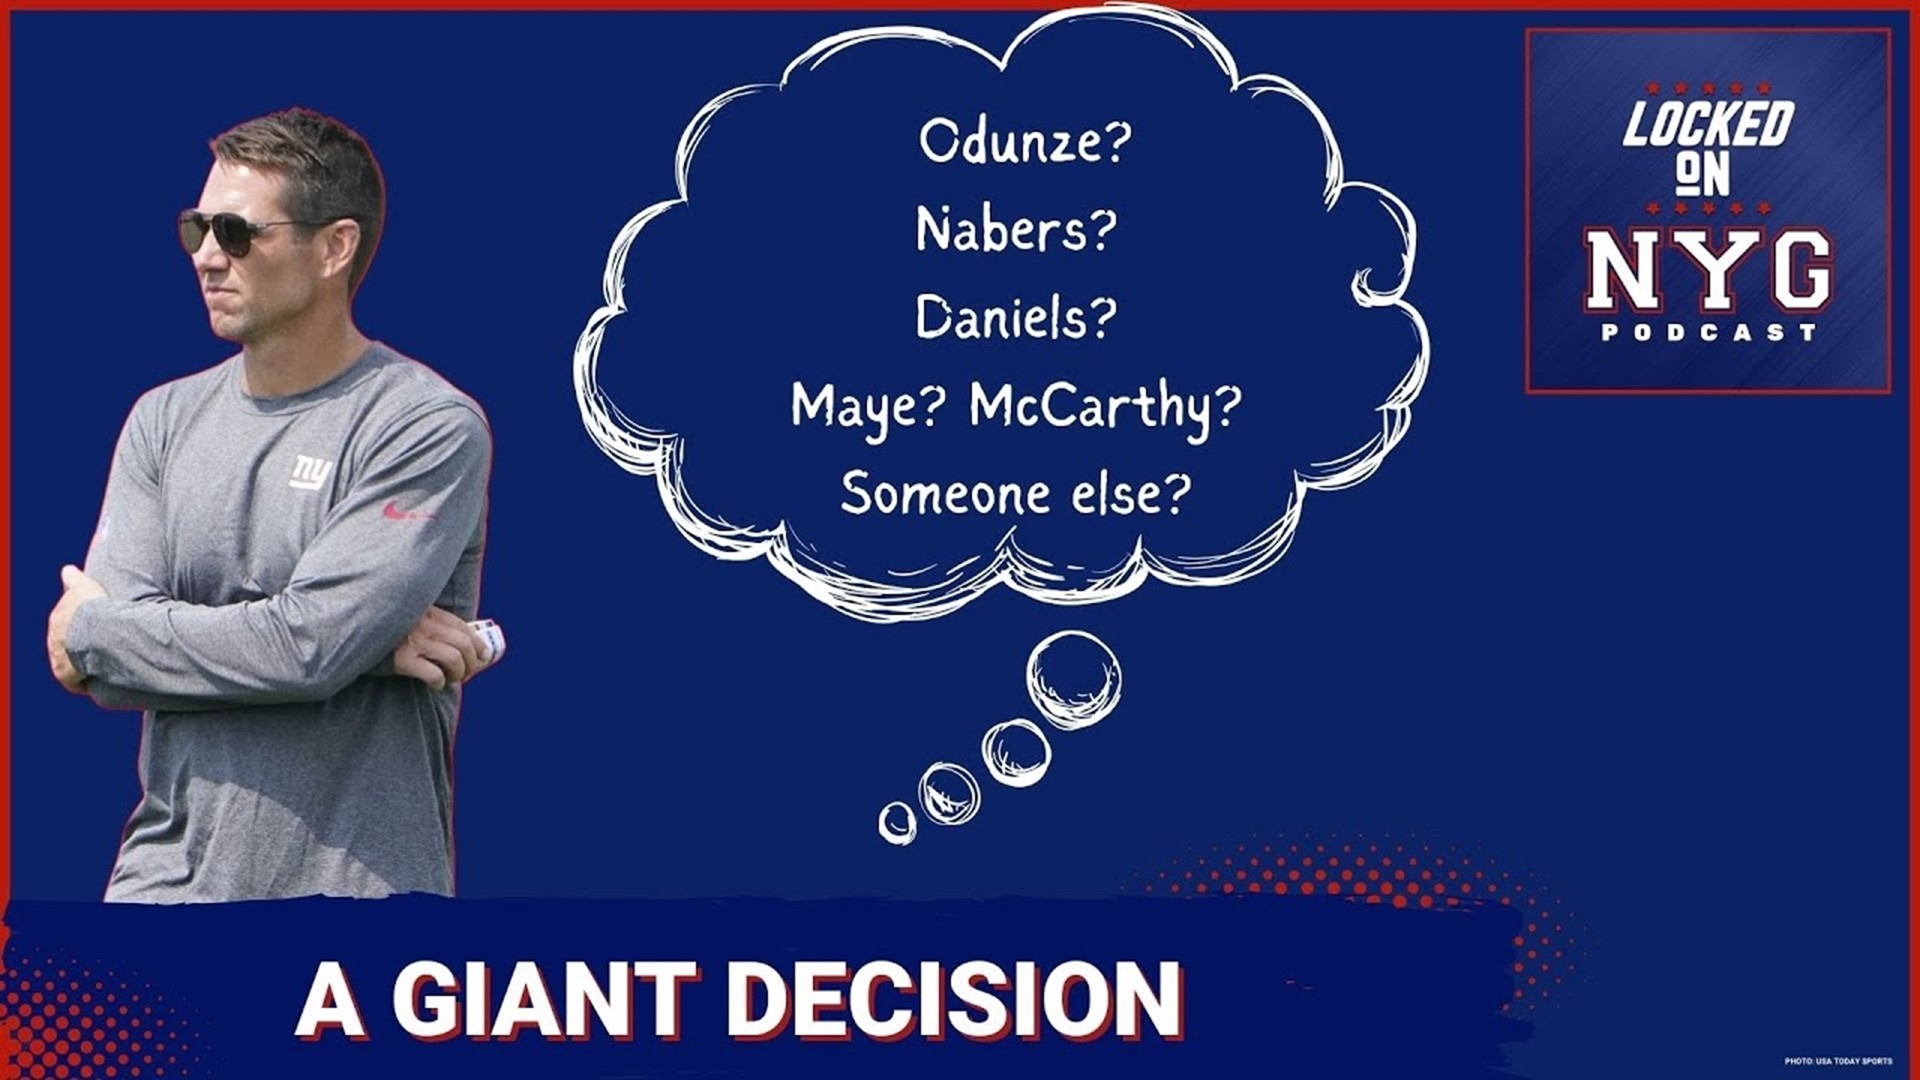 A (New York) Giant(s) Decision to Make